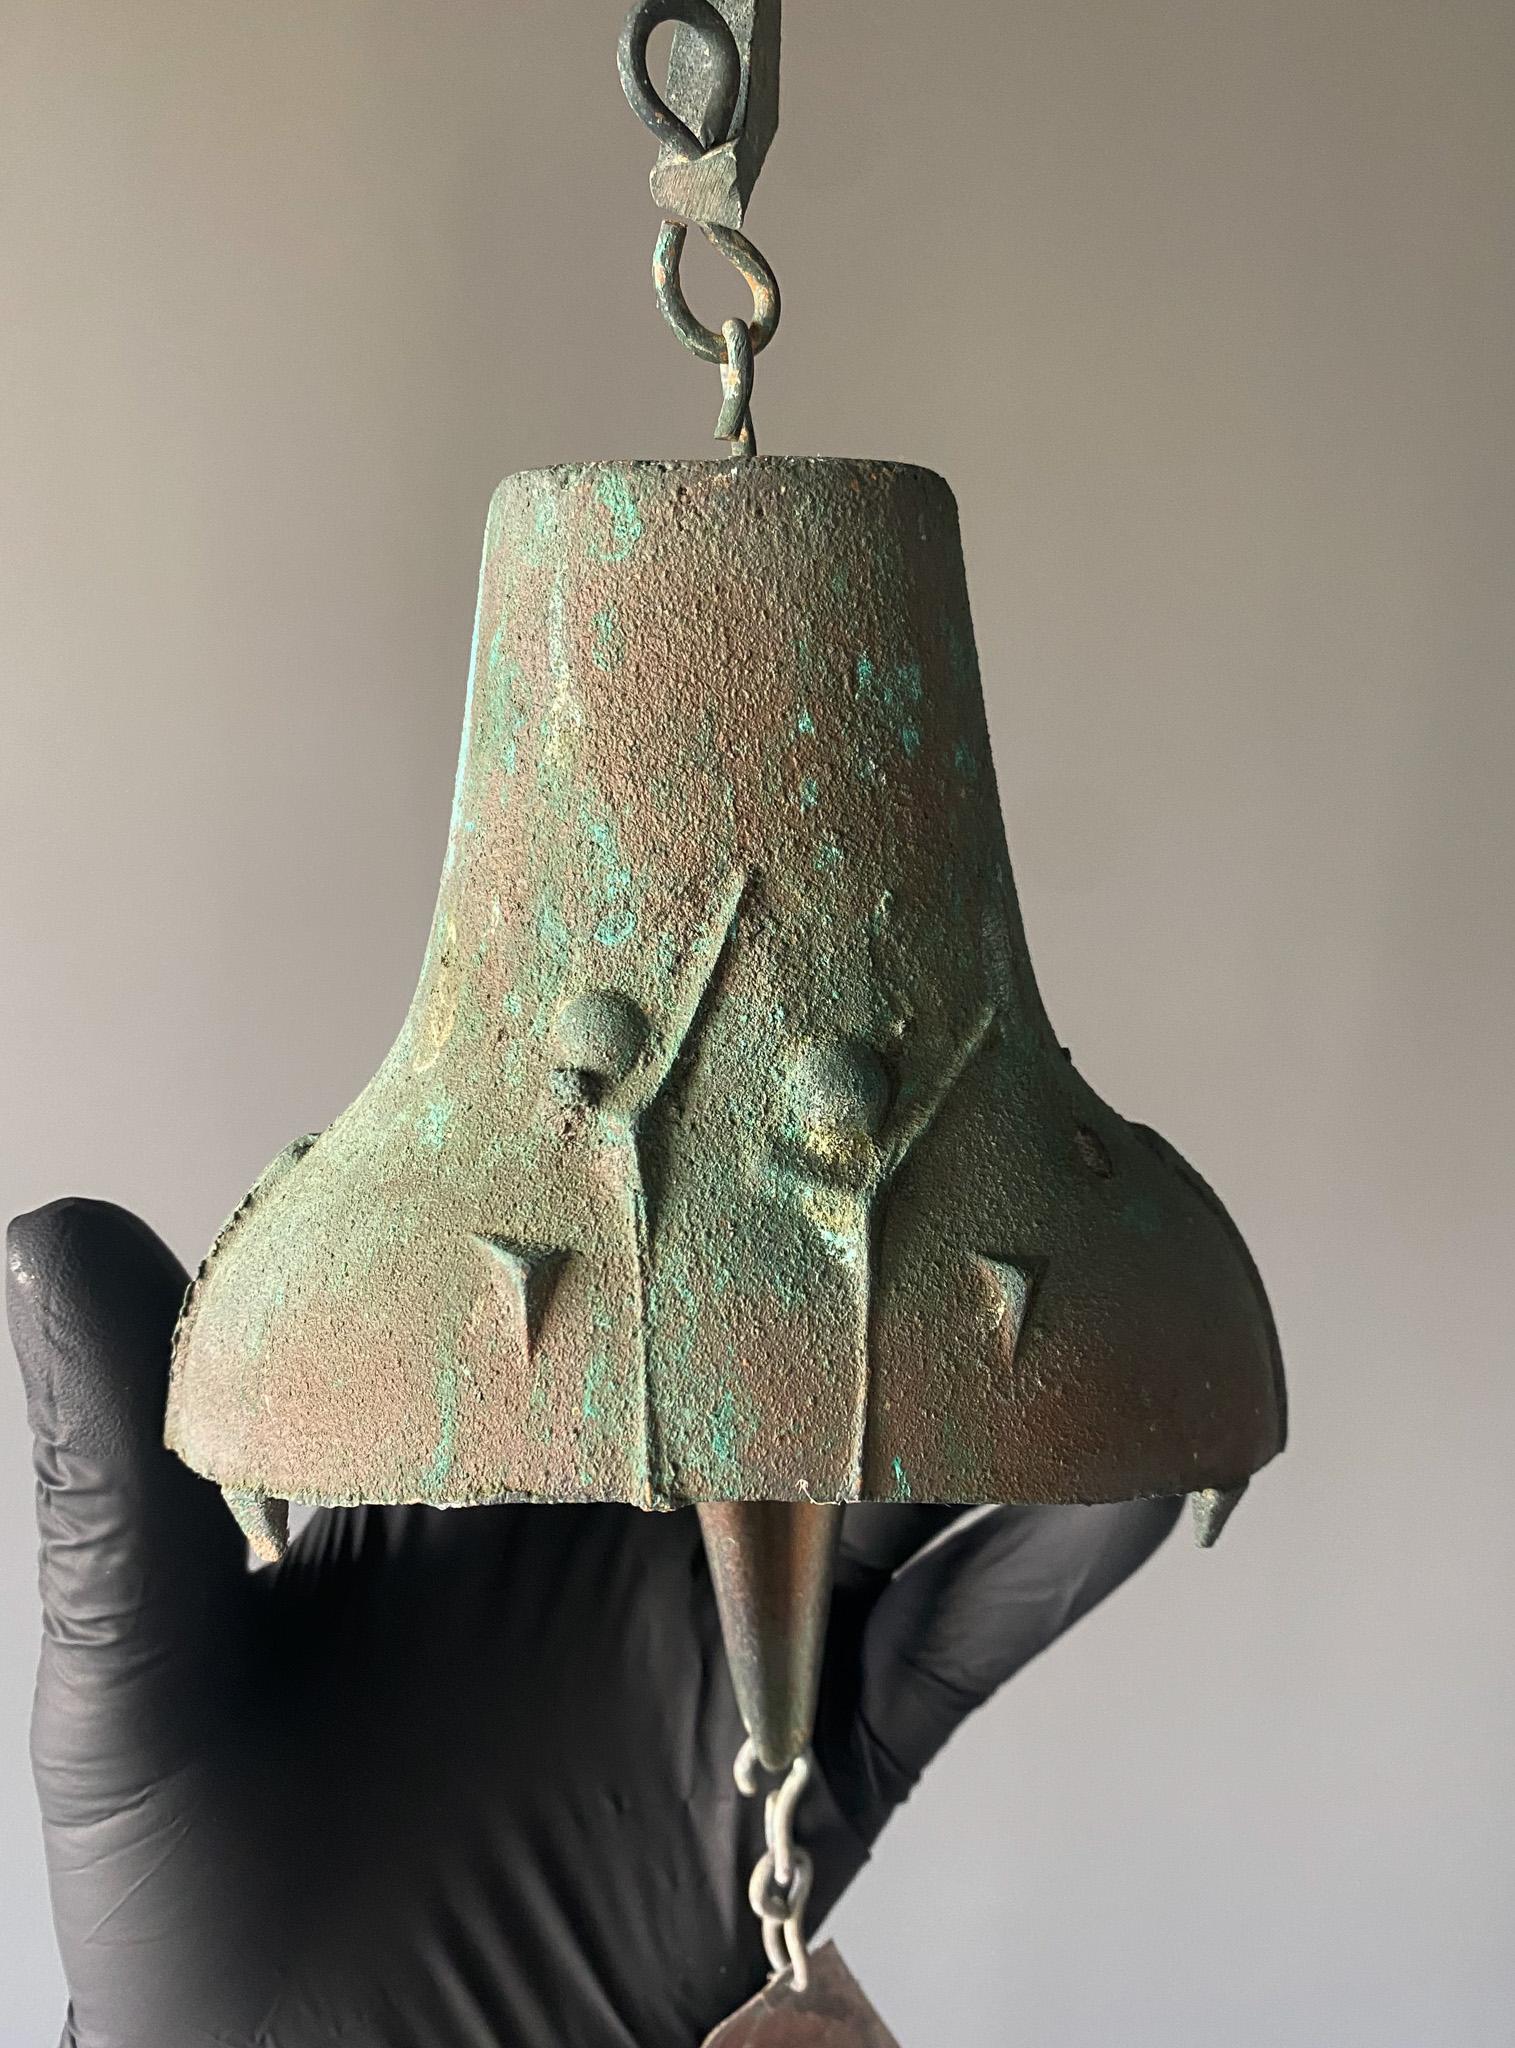 Paolo Soleri Bronze Wind Chime / Bell for Cosanti, 1970's. 